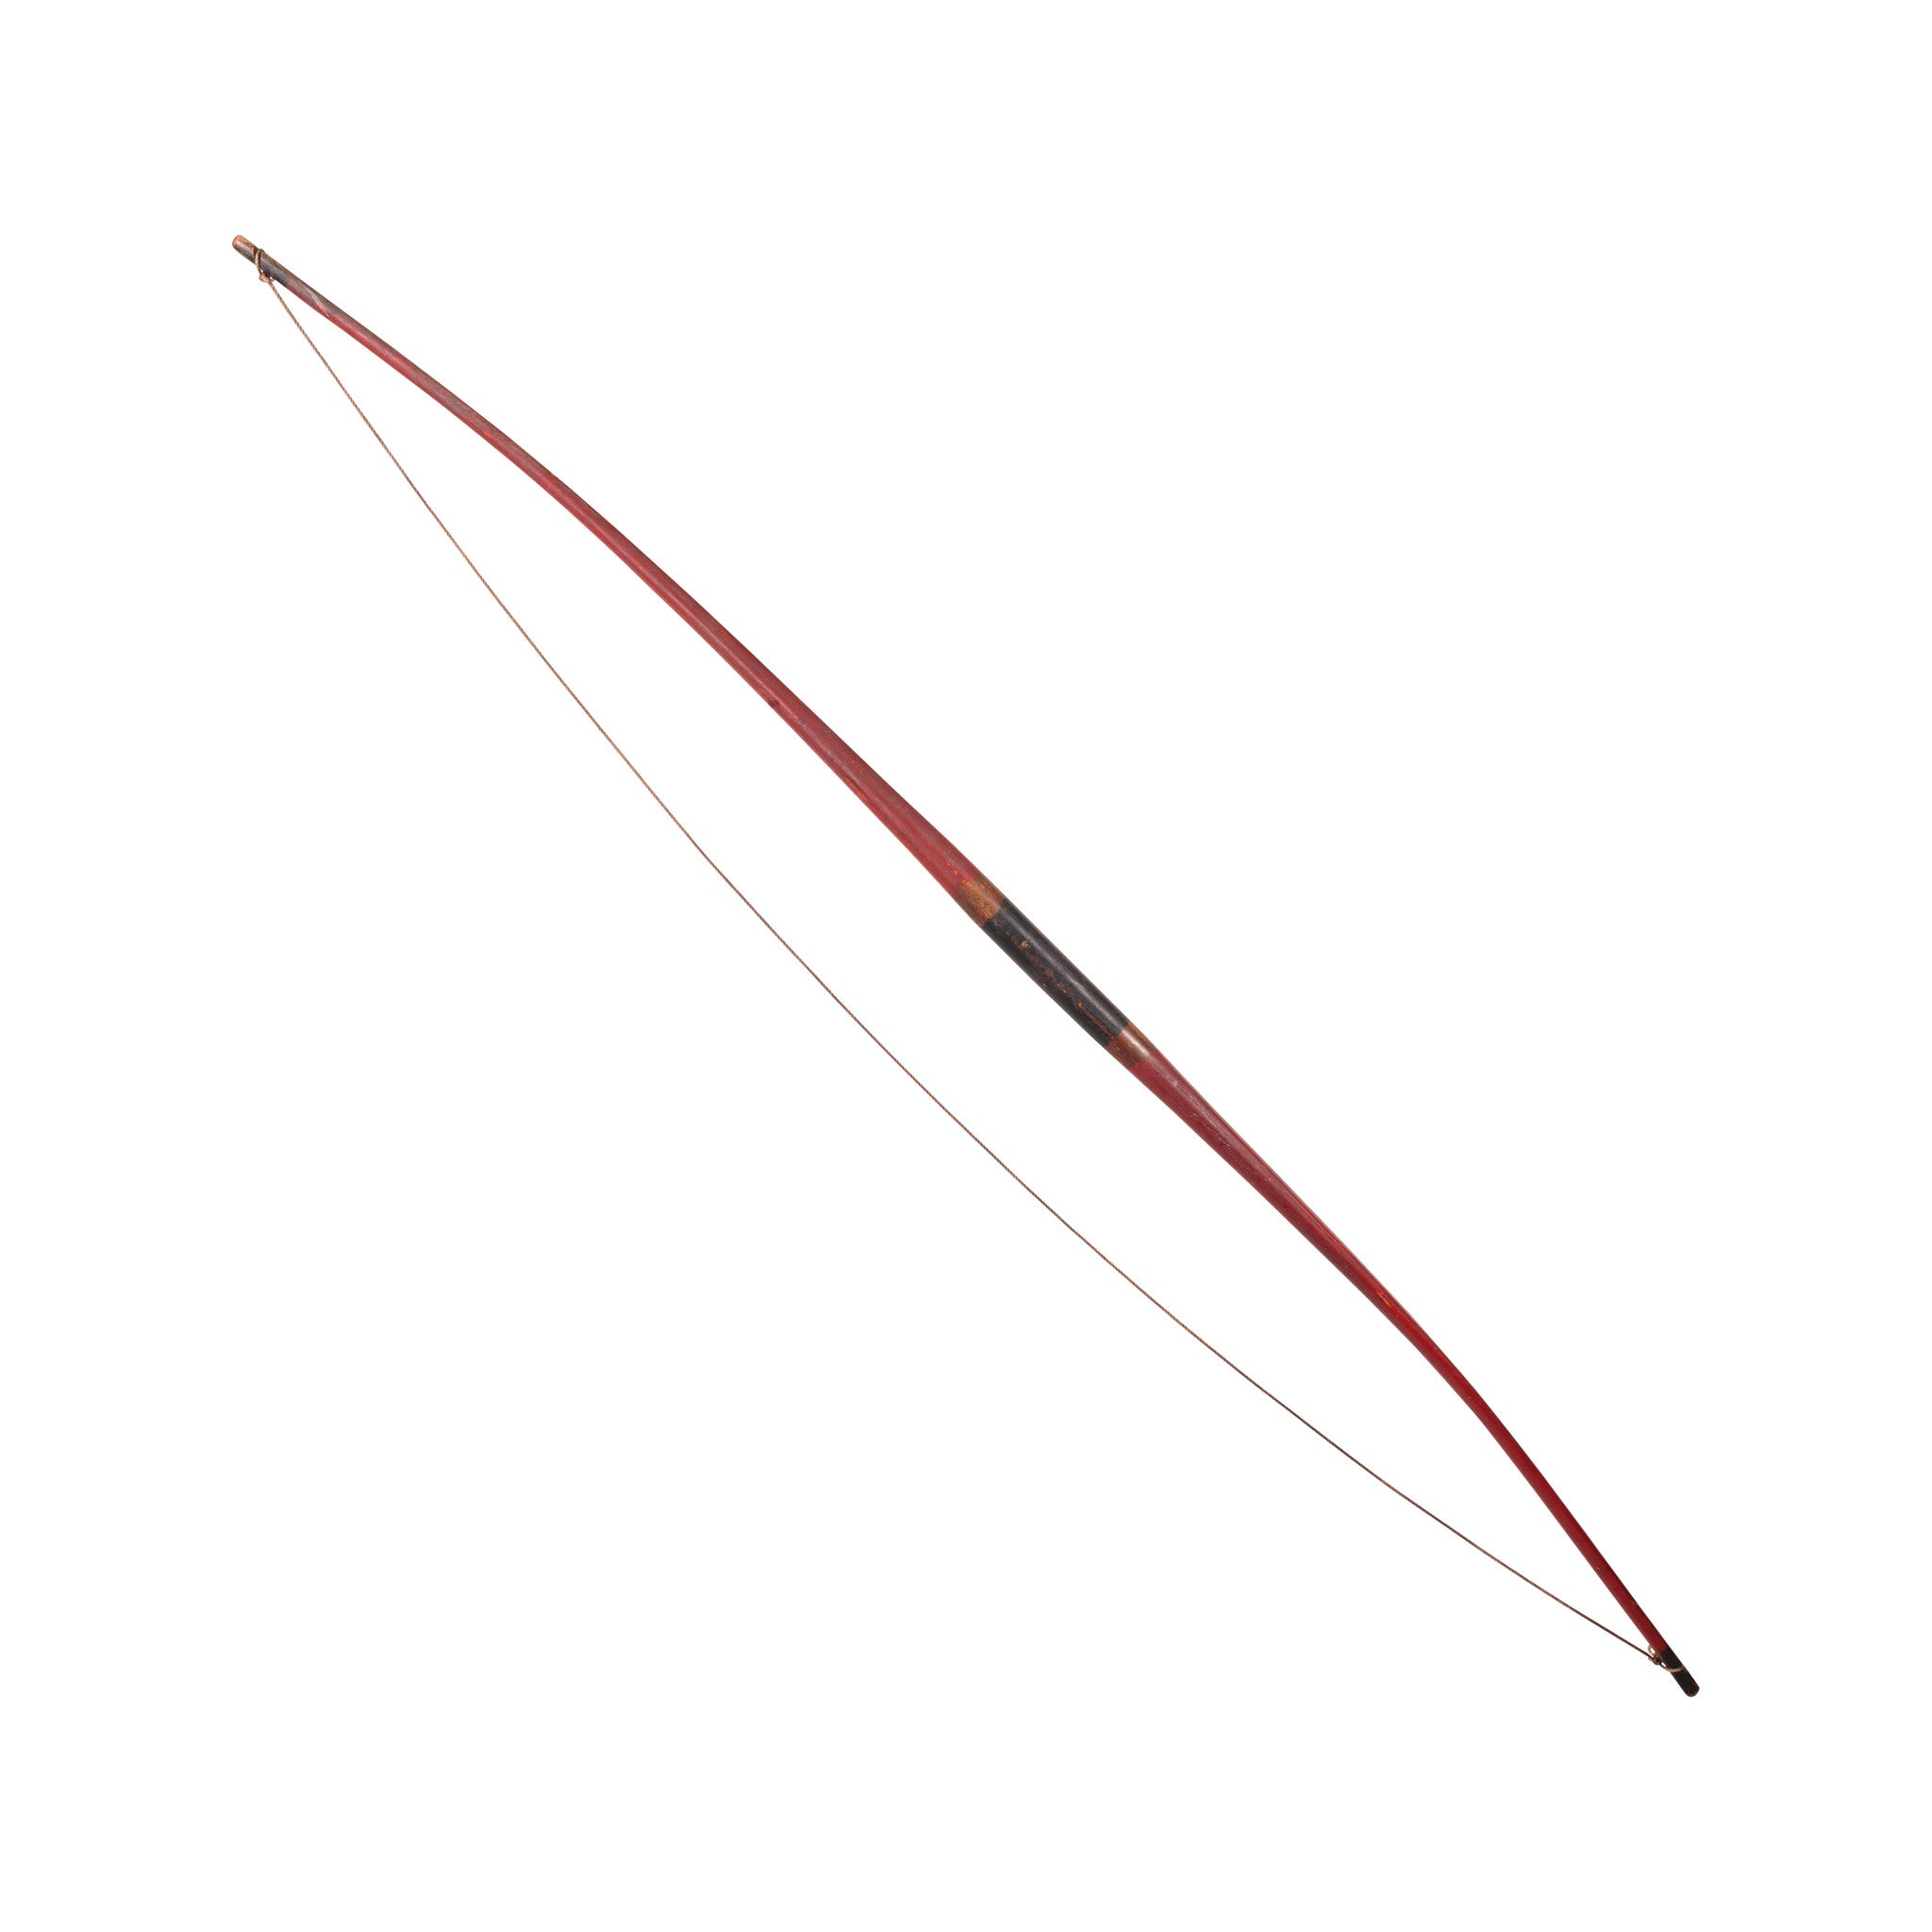 Woodlands Bow, Native, Weapon, Bow